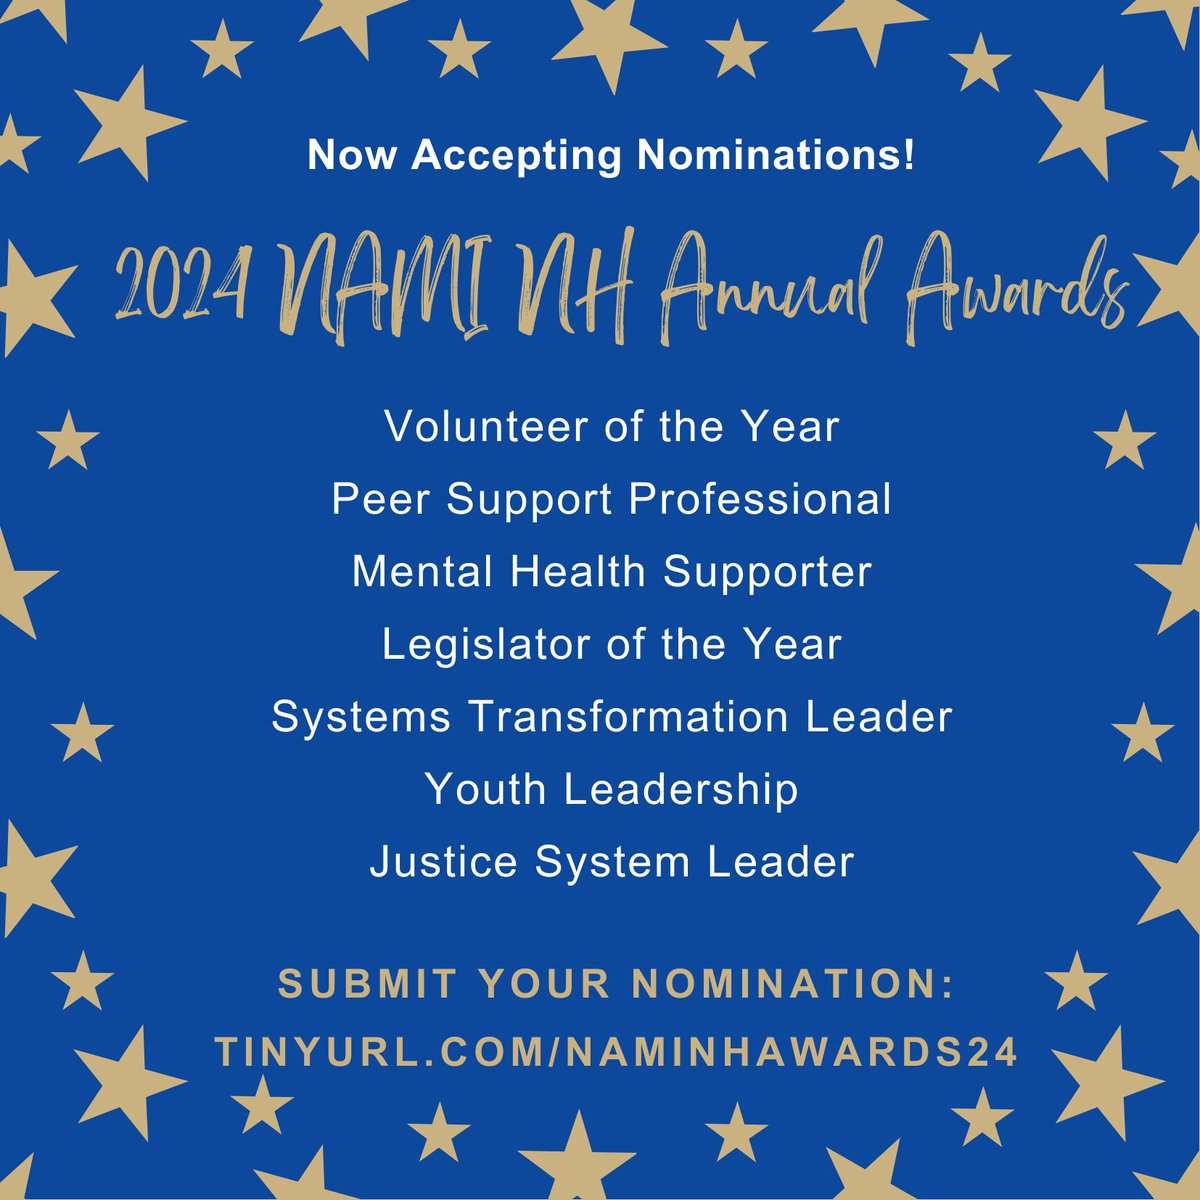 2024 NAMI NH Annual Awards – Nominations are OPEN! 🌟 Who is offering inspiration and hope in the mental health and suicide prevention fields in NH? Please share your nominations by April 30th: tinyurl.com/NAMINHAwards24